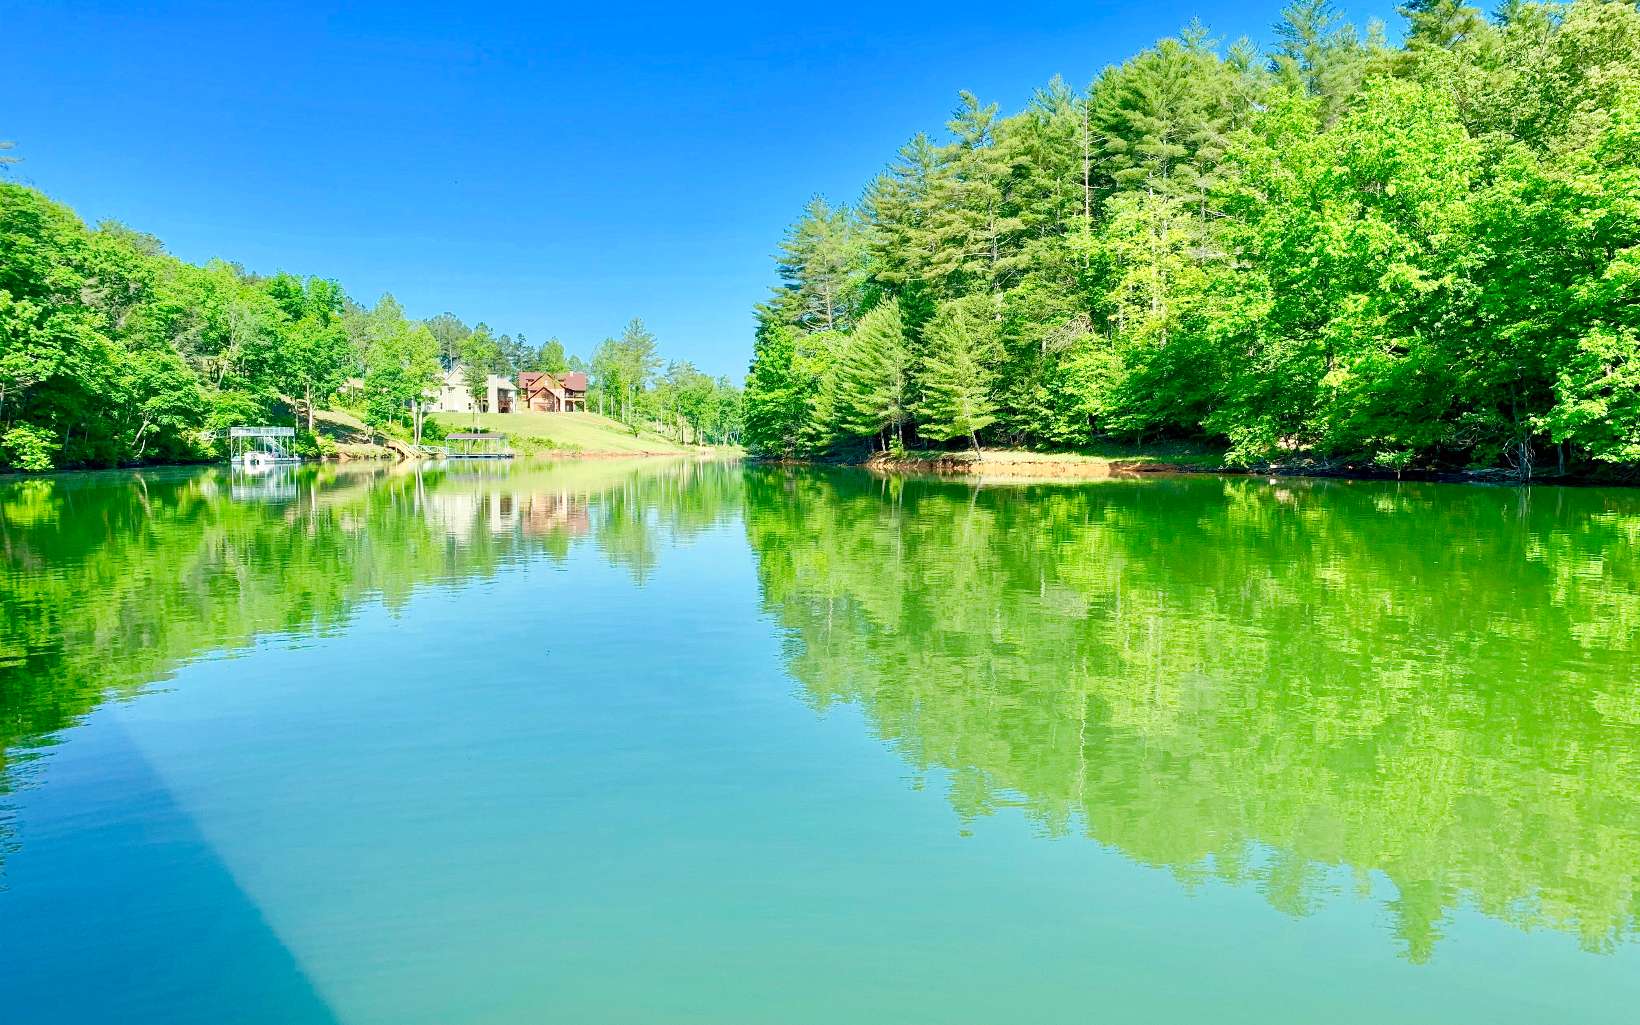 "LAKE FRONT LOT" Are you ready for true paradise located in the beautiful N Ga Mountains? Come & check out the prestigious & sought after mountain community of THIRTEEN HUNDRED ON LAKE NOTTELY. Great buildable lot sitting in a quite cul de sac. The amenities are some of the best around. Gated entrance, all paved access, beautiful lodge clubhouse with out of this world mtn views, saltwater pool, FP, bar, picnic area with grills, lake access & marina with multiple community boat slips, pavilion, fire pit area, swing, barn/stable w/small pasture, exercise area. Thirteen Hundred IS THE PLACE to call home in the MOUNTAINS. Convenient to Blairsville, Blue Ridge and Murphy NC